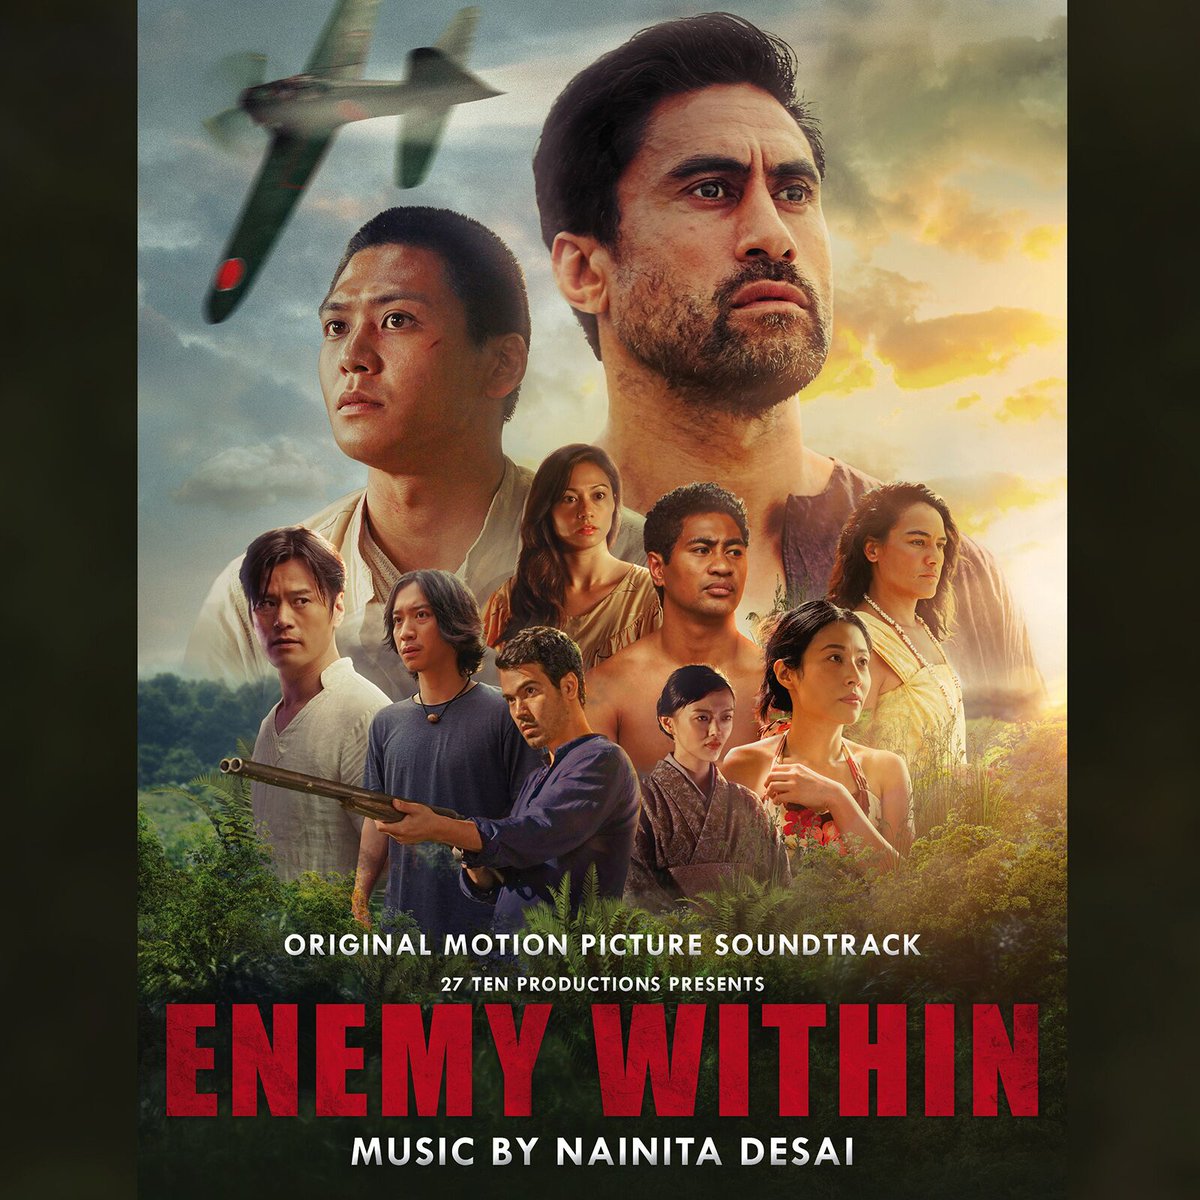 Enemy Within (2019)